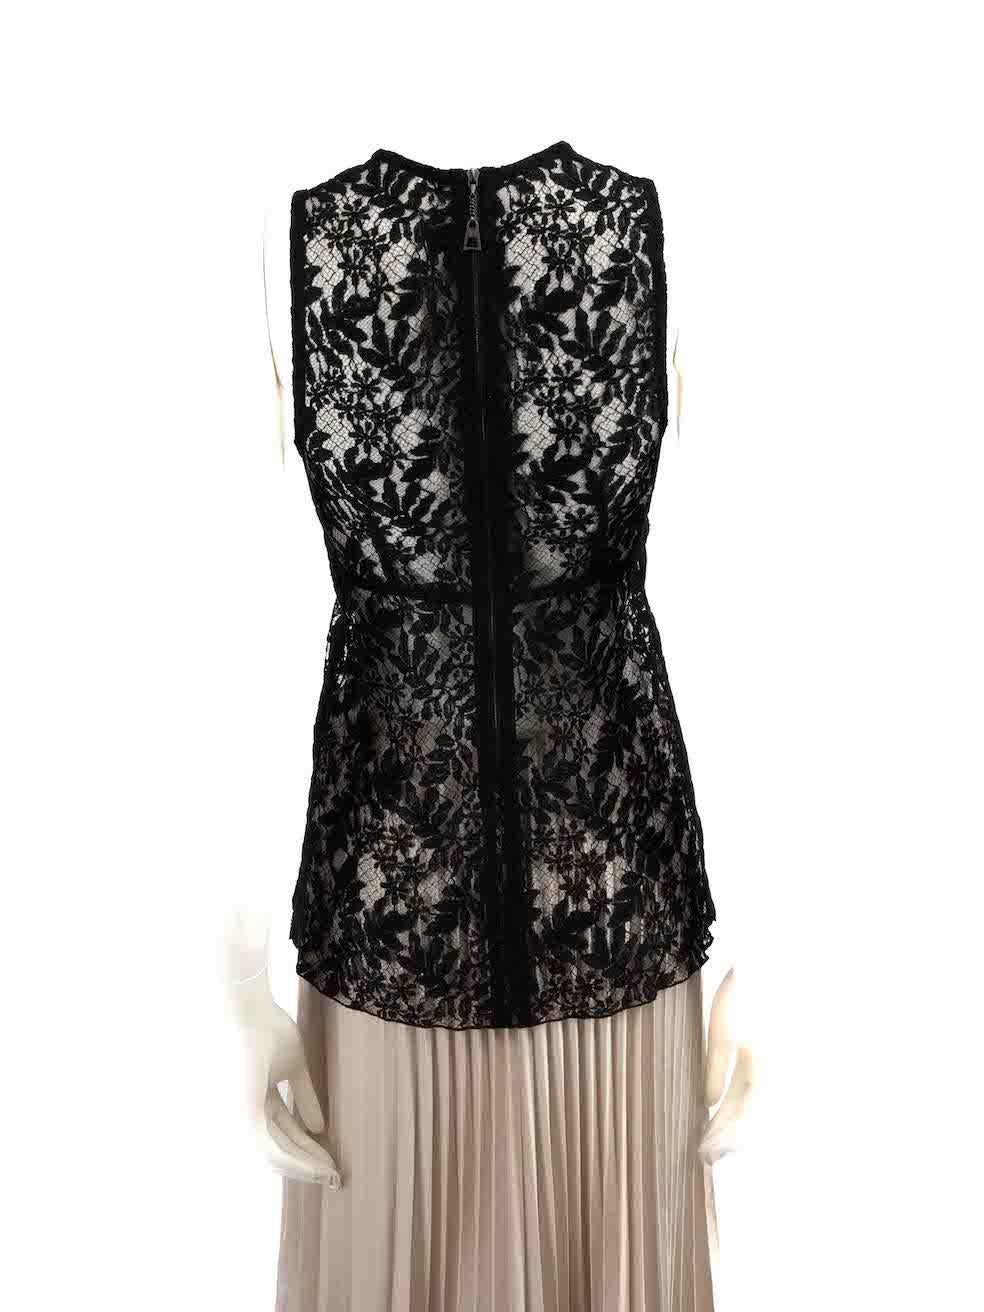 Louis Vuitton Black Lace Tank Top Size XS In Excellent Condition For Sale In London, GB